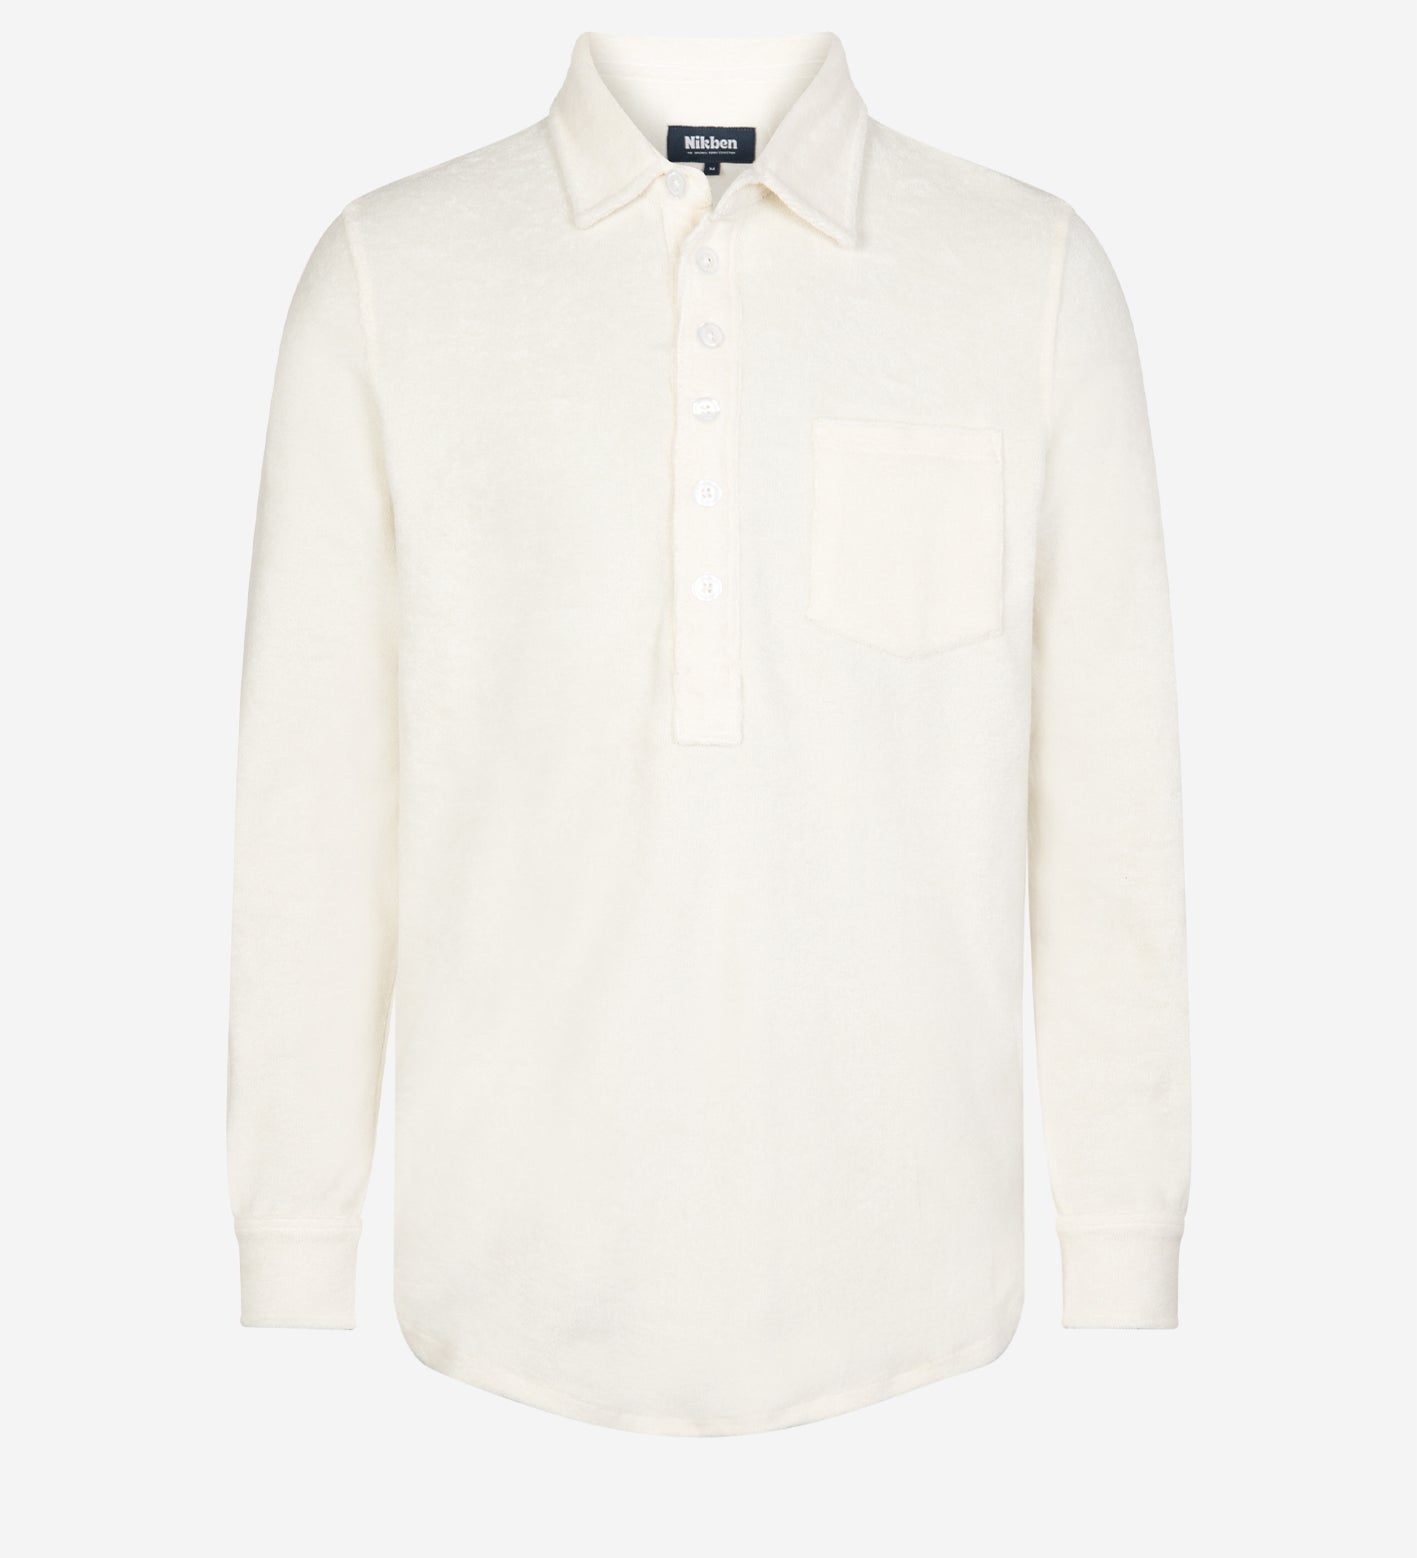 White long sleeve shirt in terry toweling fabric with half button closure and one chest pocket